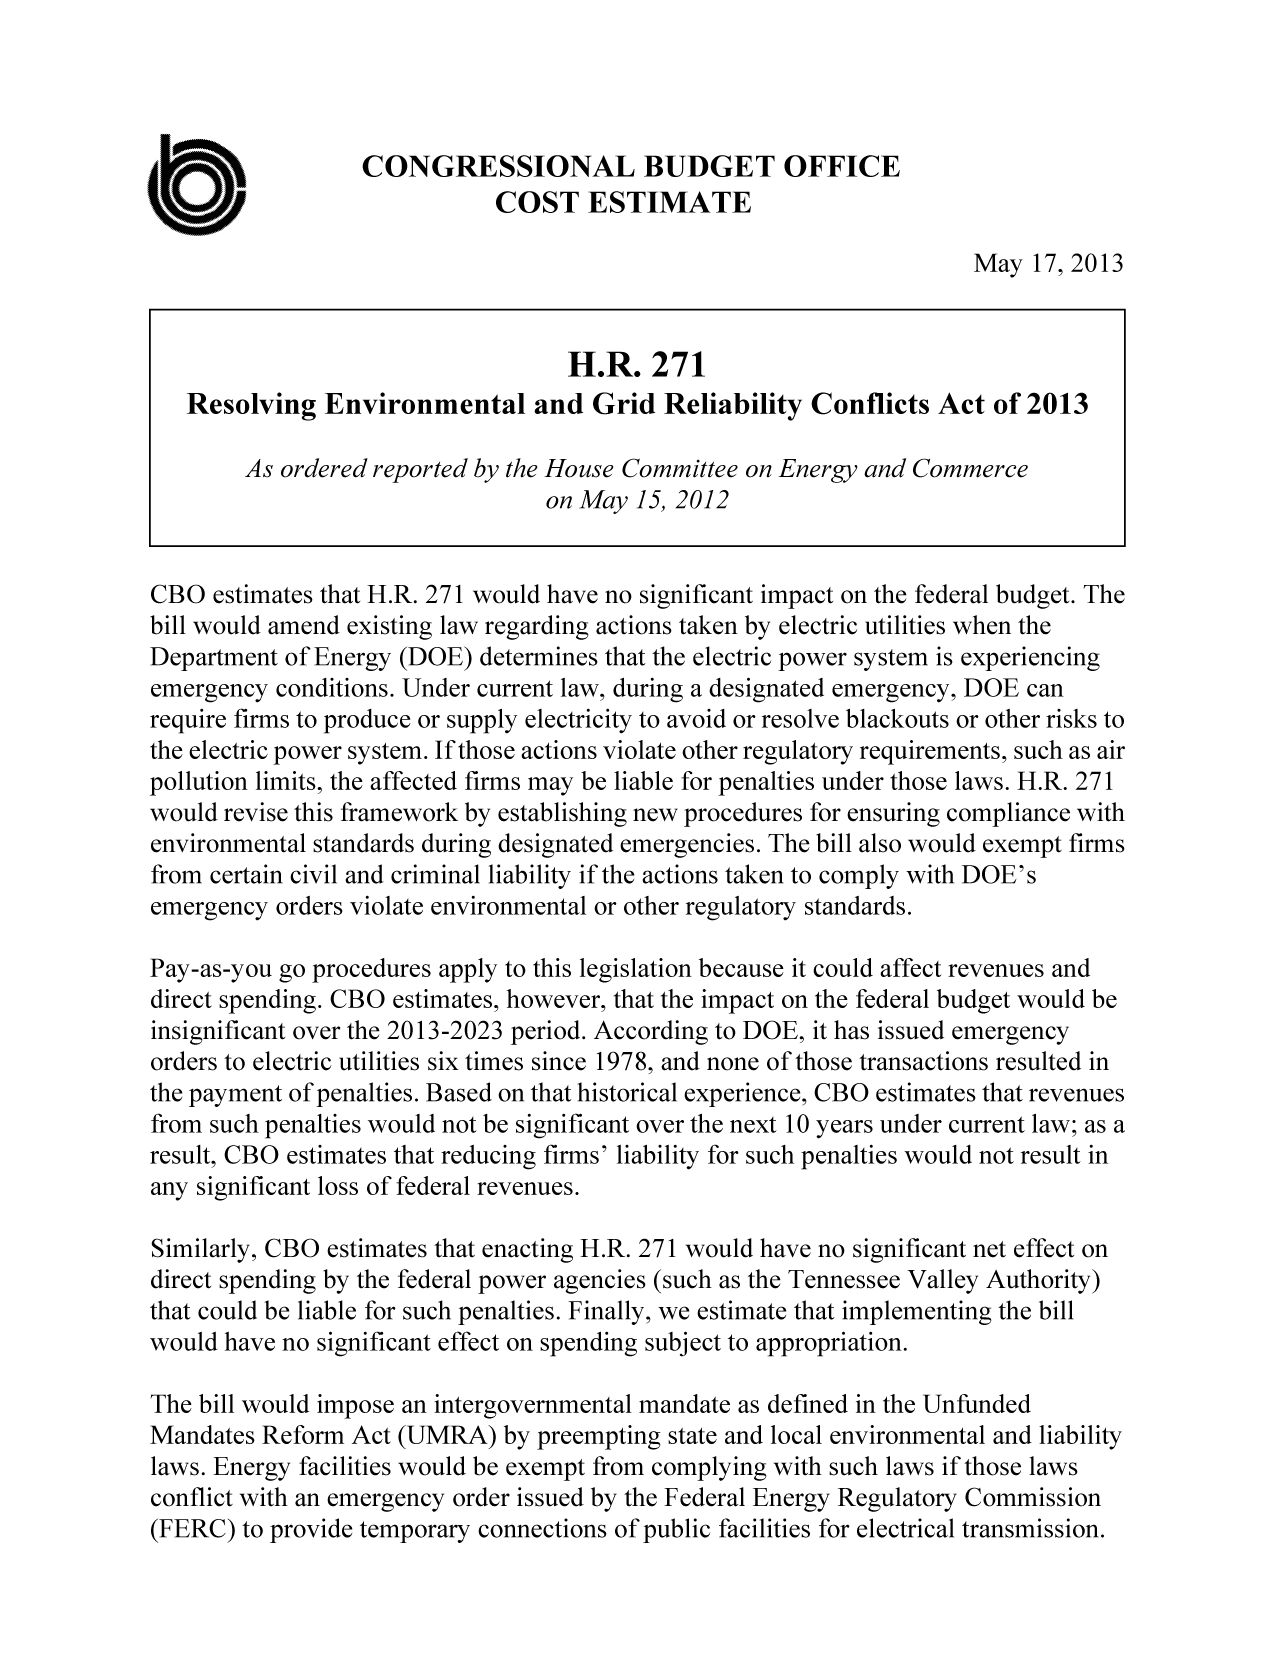 handle is hein.congrec/cbo11100 and id is 1 raw text is: CONGRESSIONAL BUDGET OFFICE
COST ESTIMATE
May 17, 2013
H.R. 271
Resolving Environmental and Grid Reliability Conflicts Act of 2013
As ordered reported by the House Committee on Energy and Commerce
on May 15, 2012
CBO estimates that H.R. 271 would have no significant impact on the federal budget. The
bill would amend existing law regarding actions taken by electric utilities when the
Department of Energy (DOE) determines that the electric power system is experiencing
emergency conditions. Under current law, during a designated emergency, DOE can
require firms to produce or supply electricity to avoid or resolve blackouts or other risks to
the electric power system. If those actions violate other regulatory requirements, such as air
pollution limits, the affected firms may be liable for penalties under those laws. H.R. 271
would revise this framework by establishing new procedures for ensuring compliance with
environmental standards during designated emergencies. The bill also would exempt firms
from certain civil and criminal liability if the actions taken to comply with DOE's
emergency orders violate environmental or other regulatory standards.
Pay-as-you go procedures apply to this legislation because it could affect revenues and
direct spending. CBO estimates, however, that the impact on the federal budget would be
insignificant over the 2013-2023 period. According to DOE, it has issued emergency
orders to electric utilities six times since 1978, and none of those transactions resulted in
the payment of penalties. Based on that historical experience, CBO estimates that revenues
from such penalties would not be significant over the next 10 years under current law; as a
result, CBO estimates that reducing firms' liability for such penalties would not result in
any significant loss of federal revenues.
Similarly, CBO estimates that enacting H.R. 271 would have no significant net effect on
direct spending by the federal power agencies (such as the Tennessee Valley Authority)
that could be liable for such penalties. Finally, we estimate that implementing the bill
would have no significant effect on spending subject to appropriation.
The bill would impose an intergovernmental mandate as defined in the Unfunded
Mandates Reform Act (UMRA) by preempting state and local environmental and liability
laws. Energy facilities would be exempt from complying with such laws if those laws
conflict with an emergency order issued by the Federal Energy Regulatory Commission
(FERC) to provide temporary connections of public facilities for electrical transmission.


